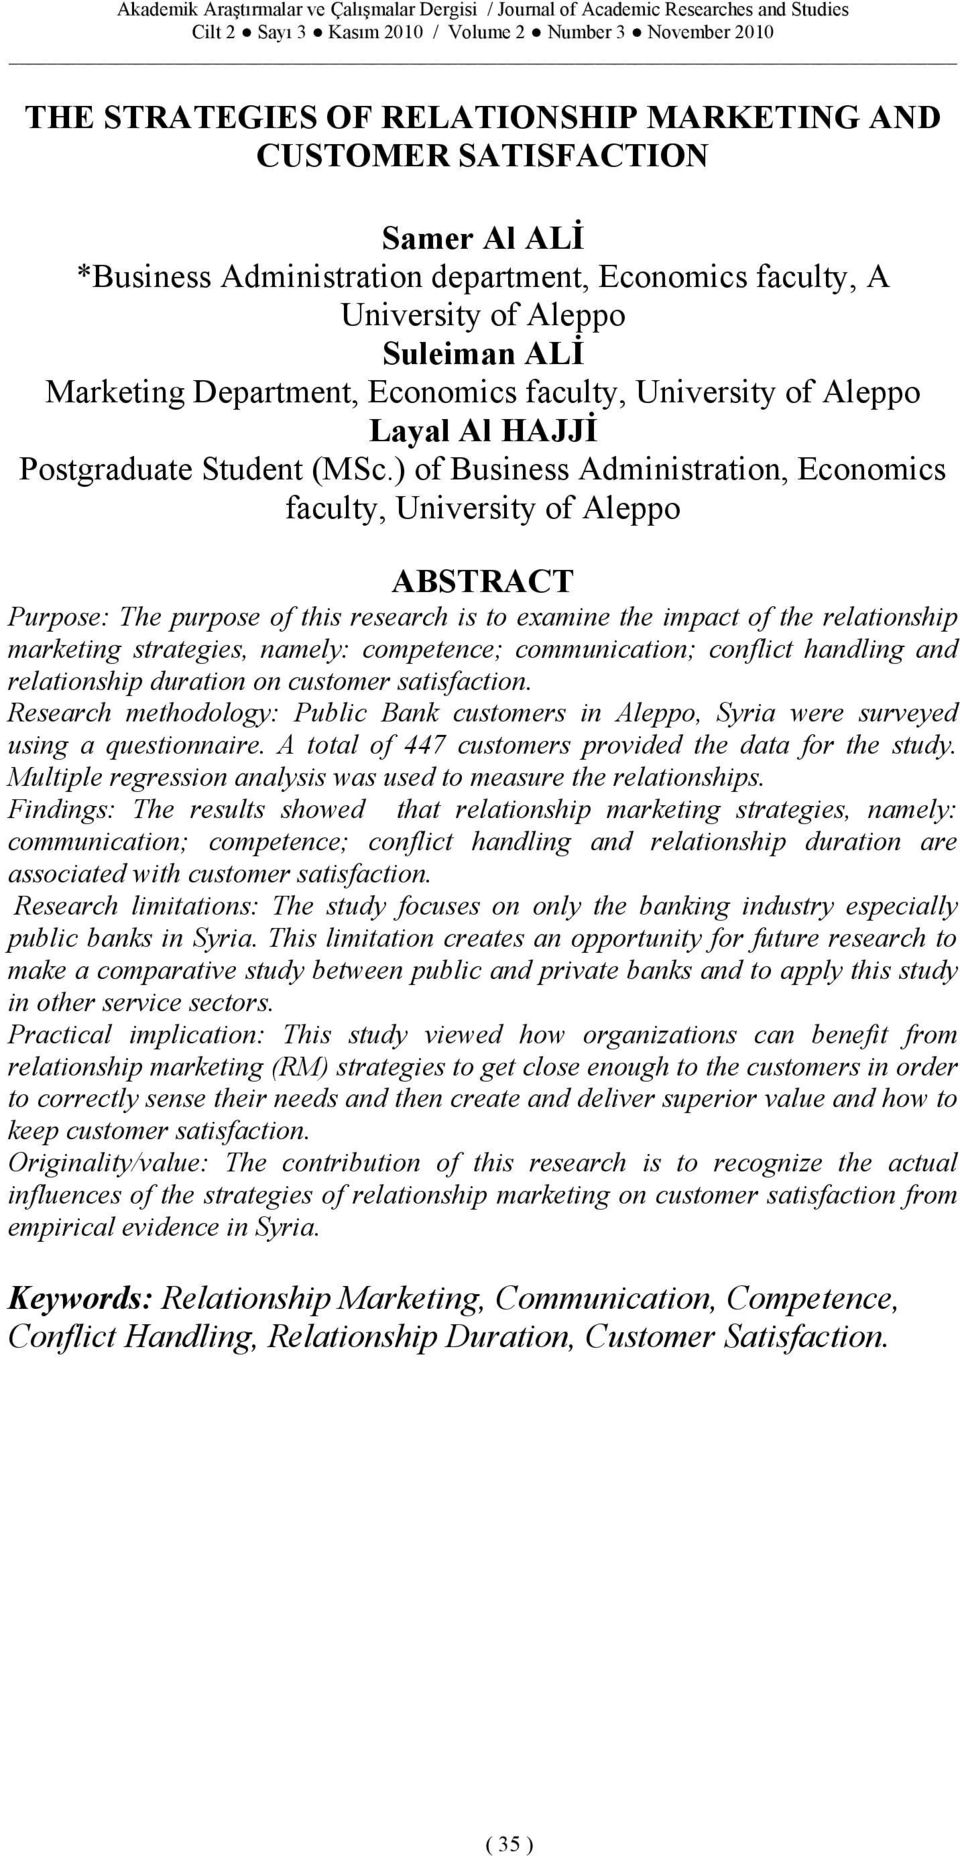 ) of Business Administration, Economics faculty, University of Aleppo ABSTRACT Purpose: The purpose of this research is to examine the impact of the relationship marketing strategies, namely: